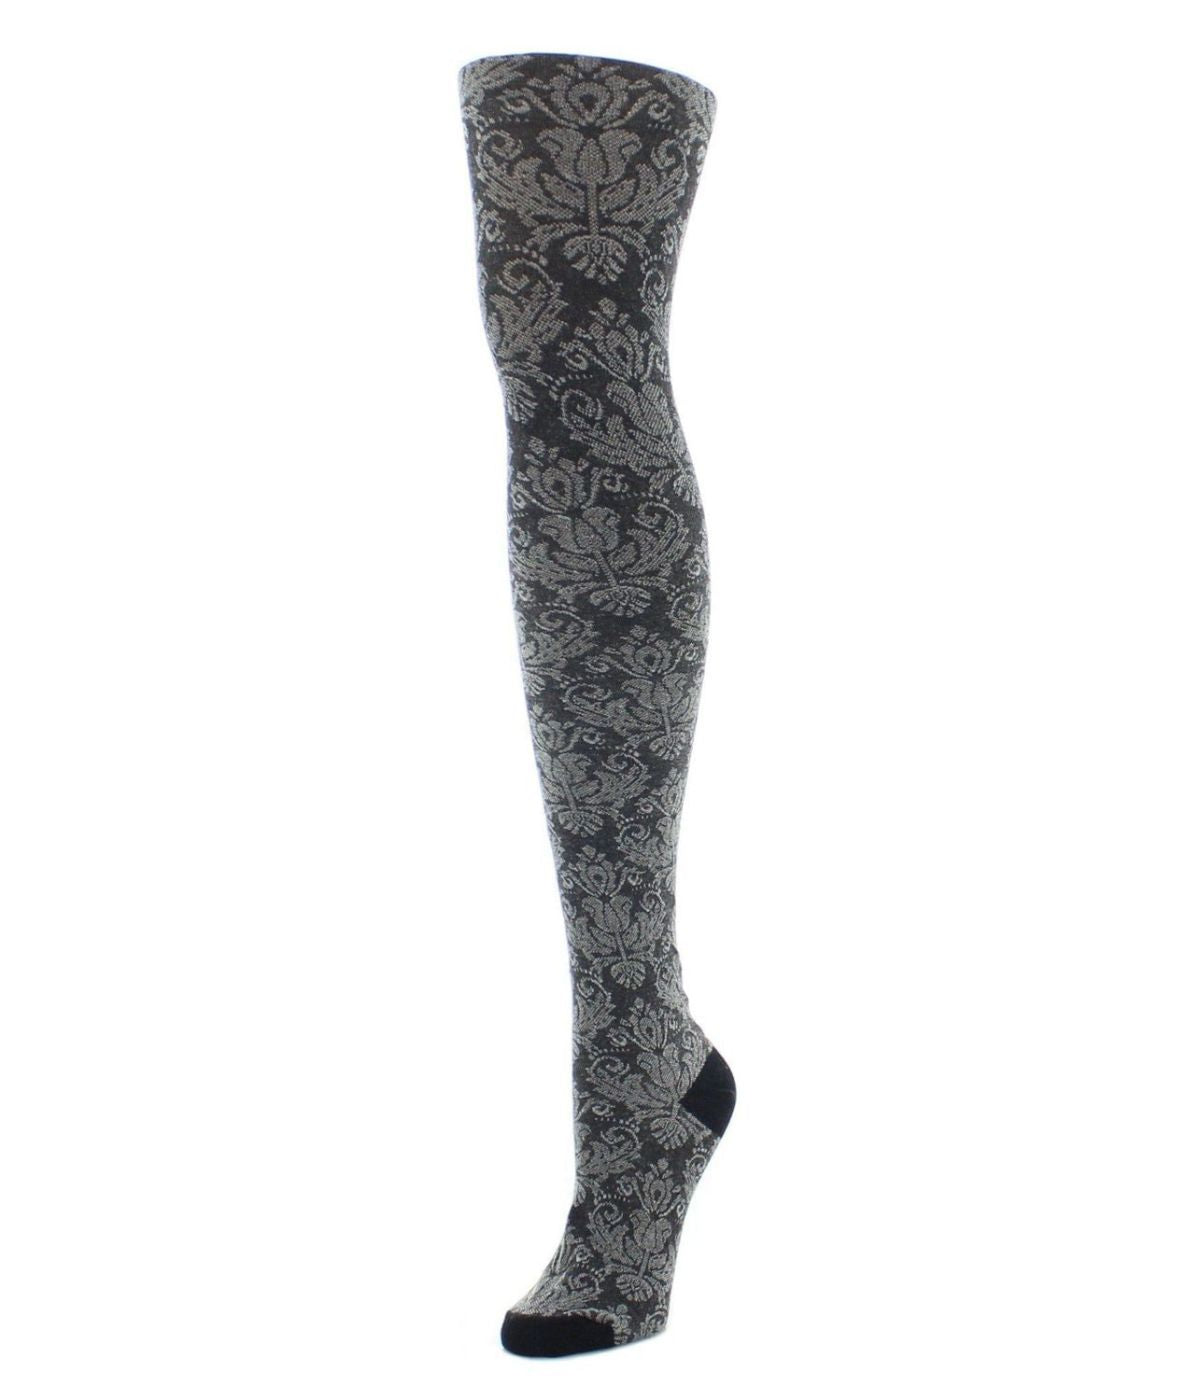 Baroque Patterned Cotton Blend Sweater Tights Black